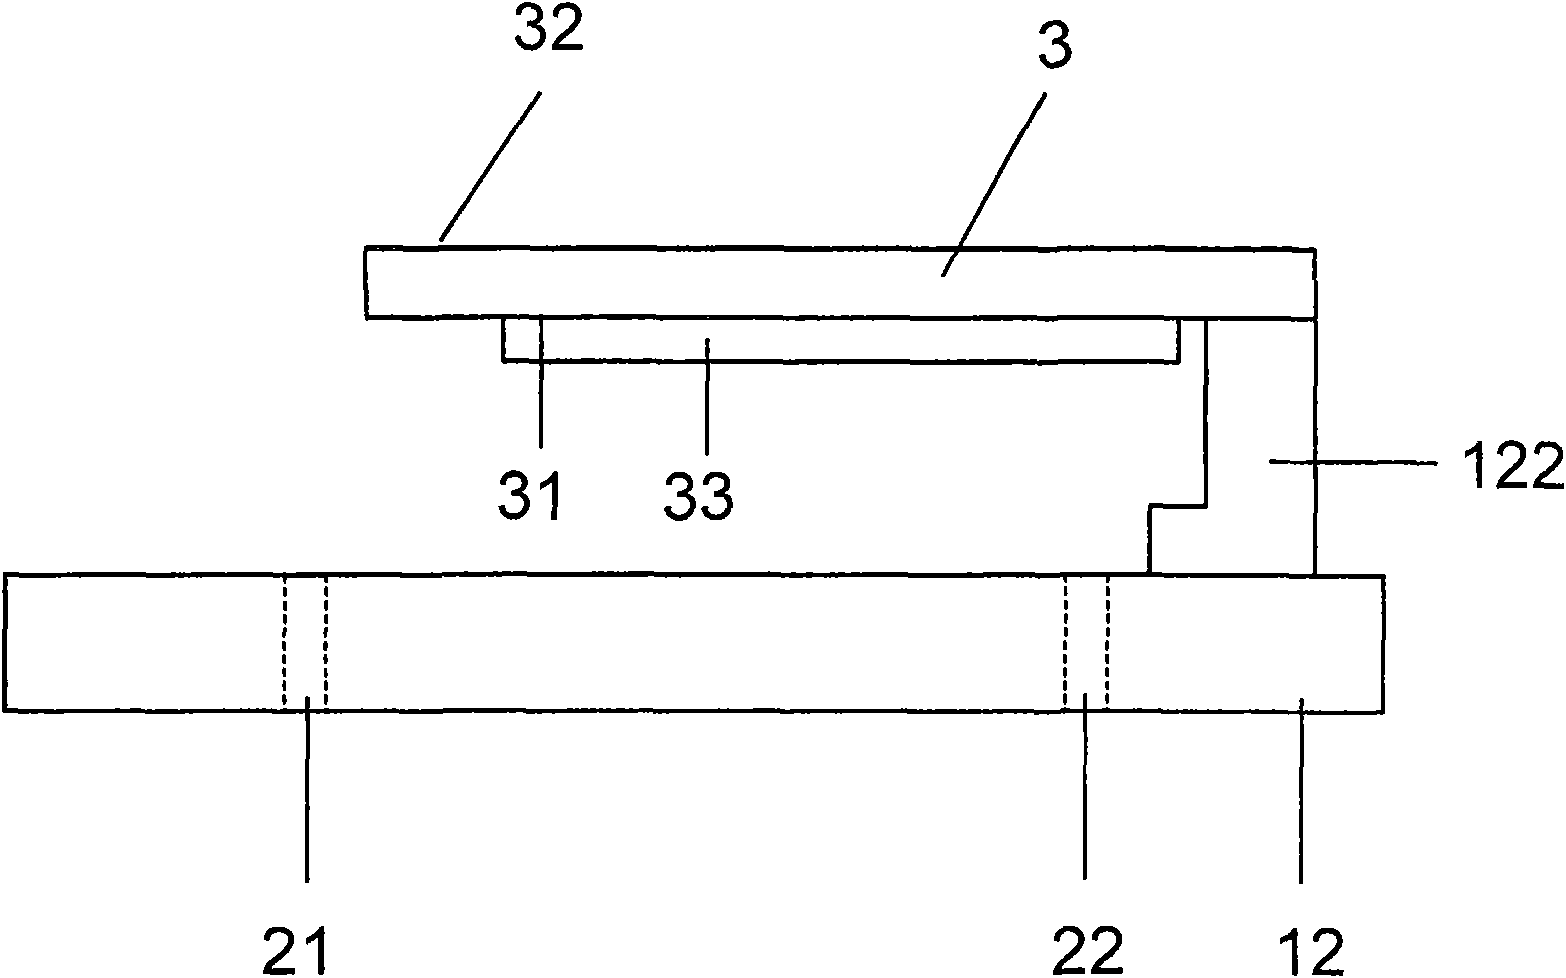 Photomask storage device and method for keeping photomask clean and dry